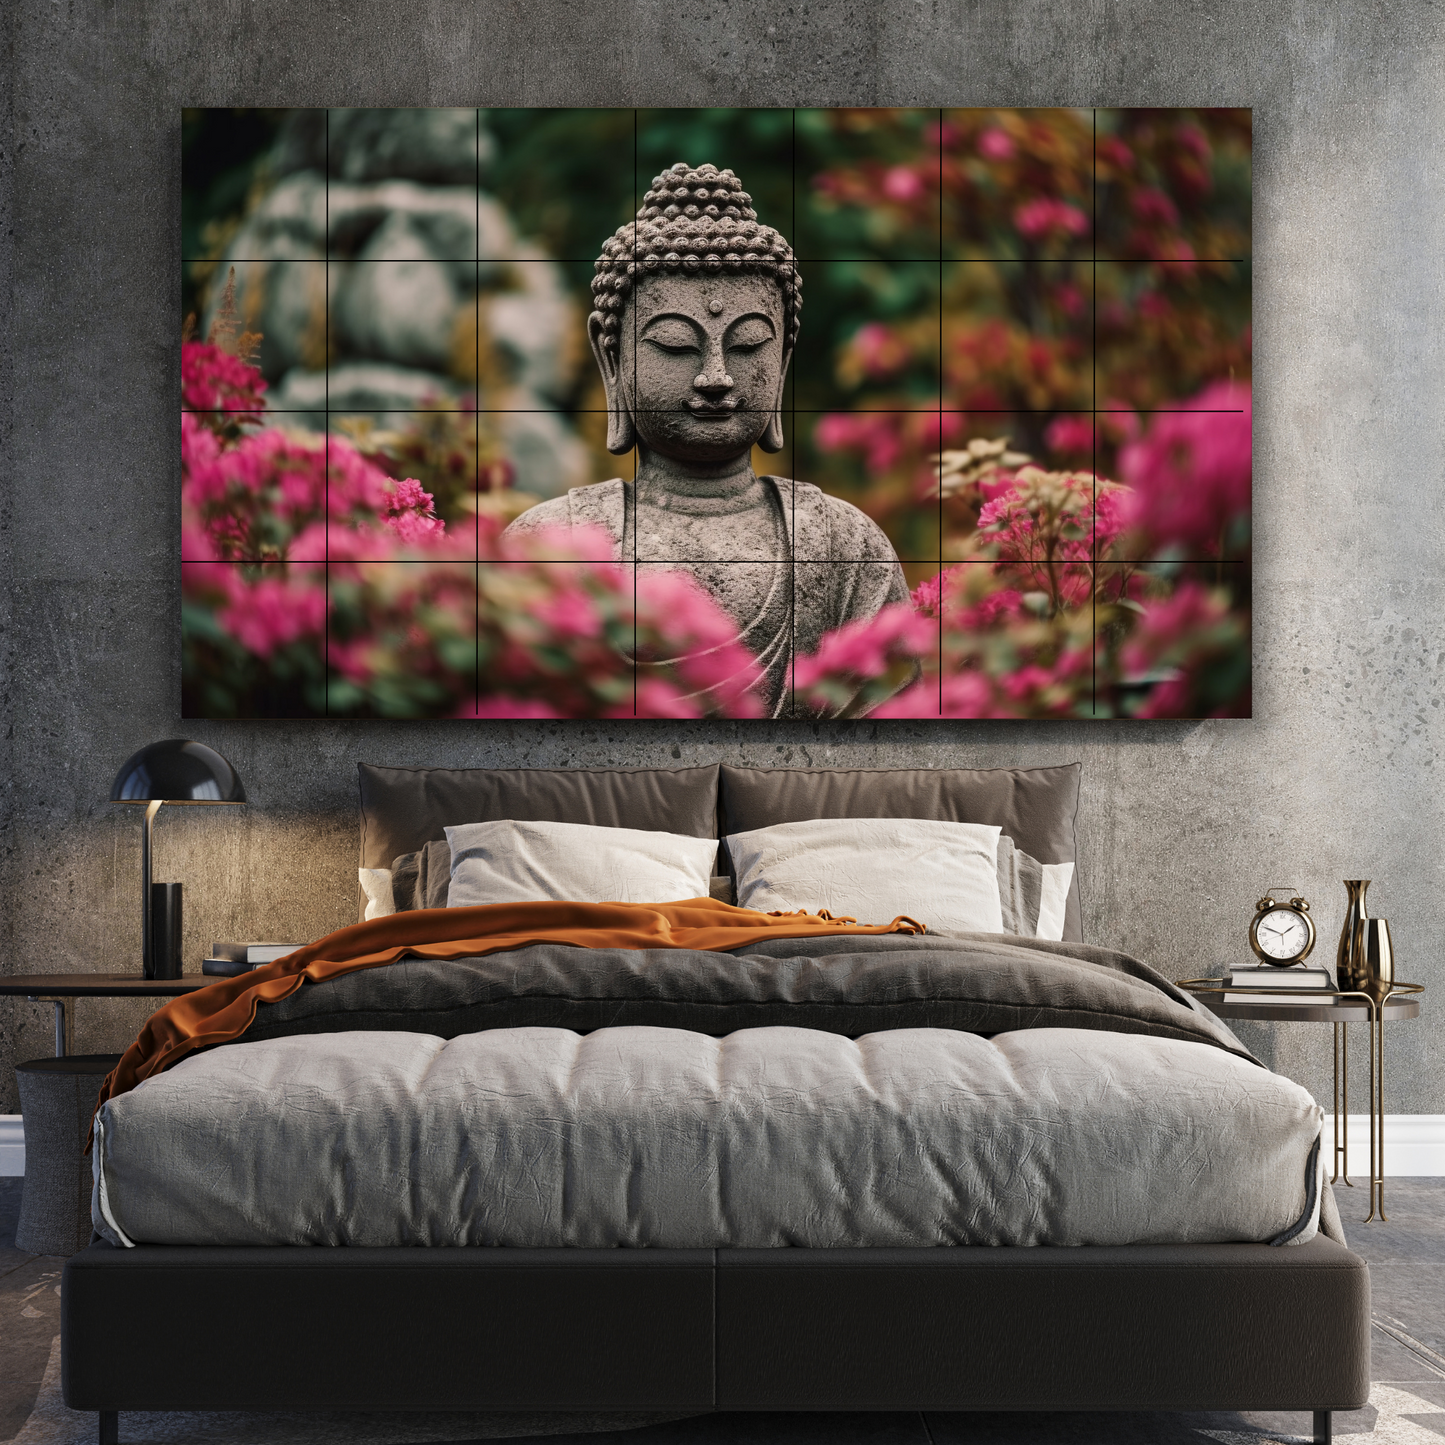 Meditating Buddha With Flowers Wood Print Wooden Wall Tiles Set